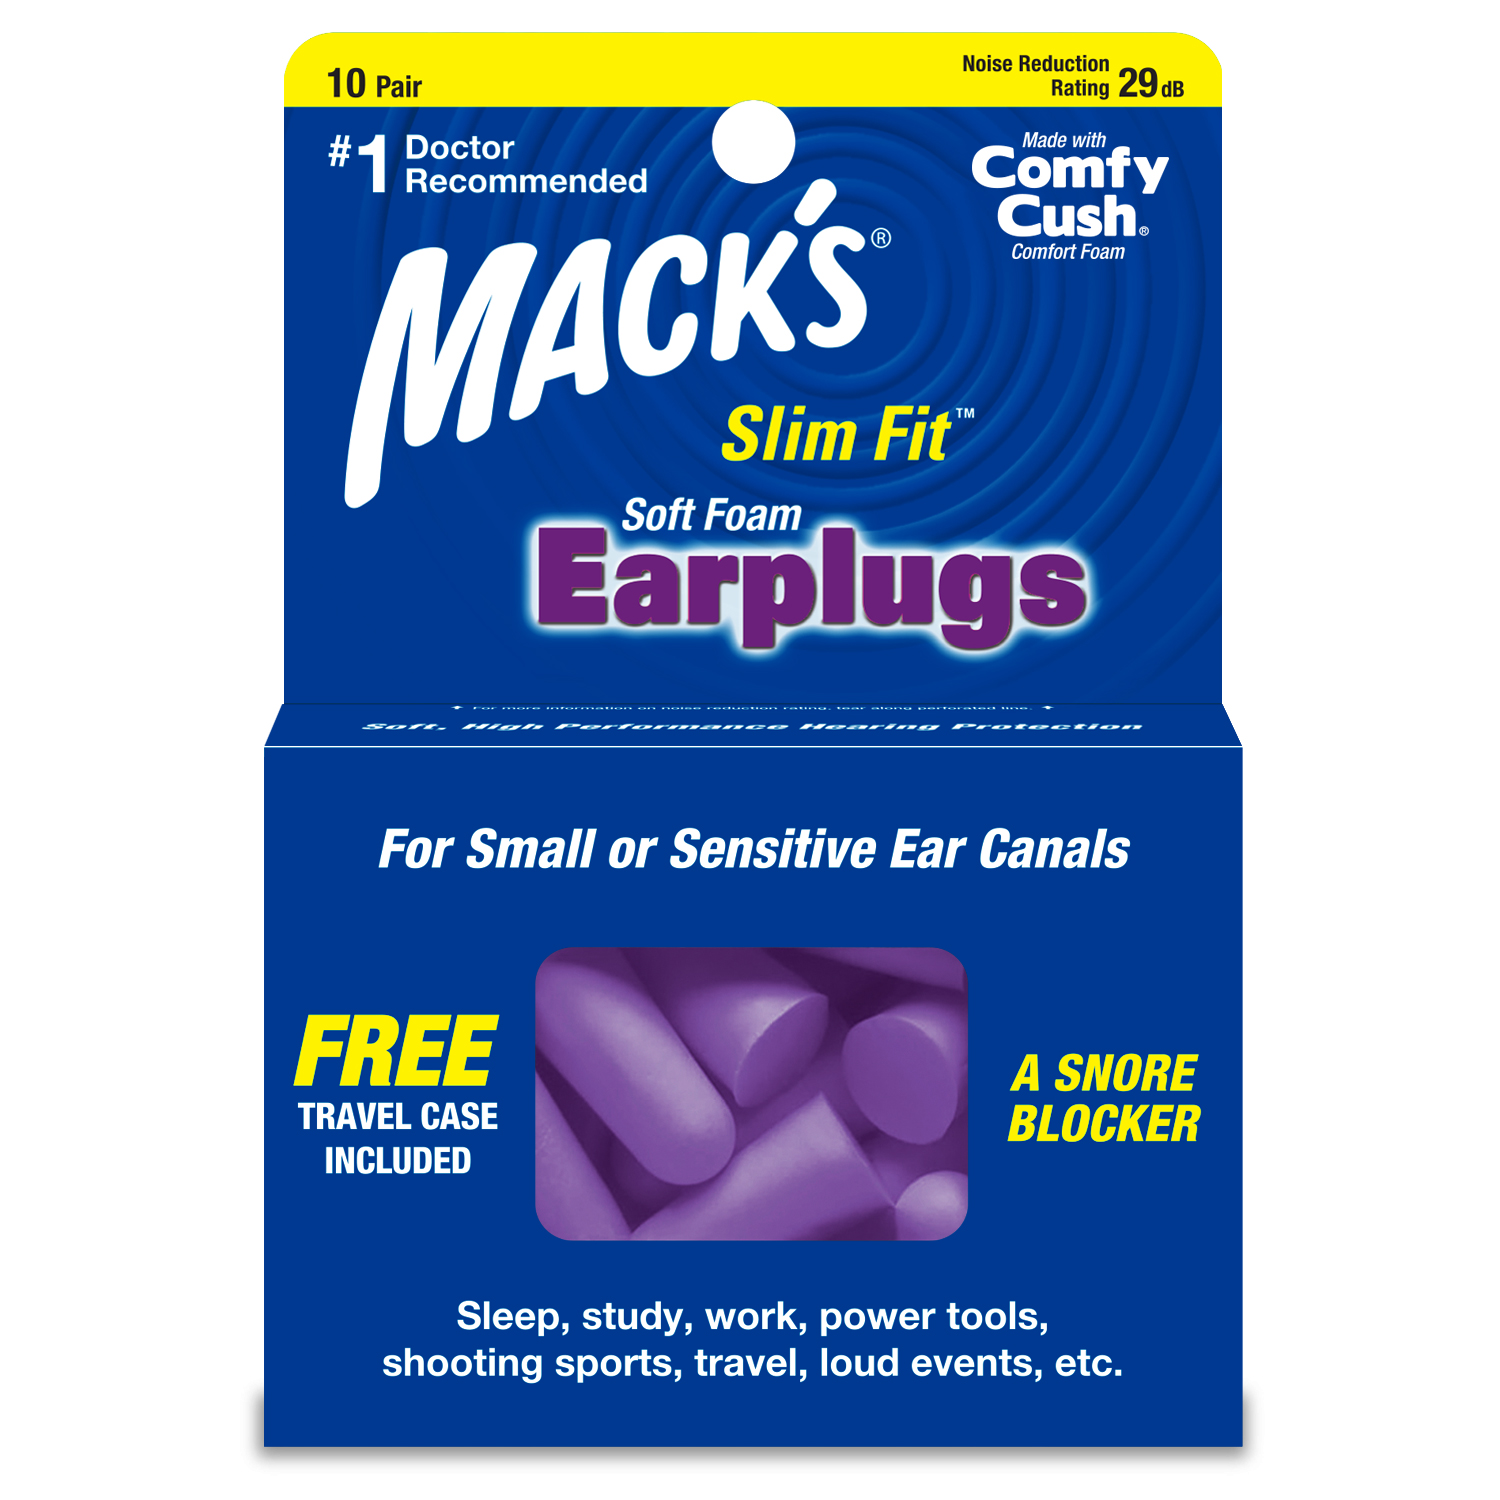 macks earplugs slim fit soft foam ear plugs for sleeping and small ear canals to help block out noise are best ear plugs for noise cancelling and best purple ear plugs for sleeping